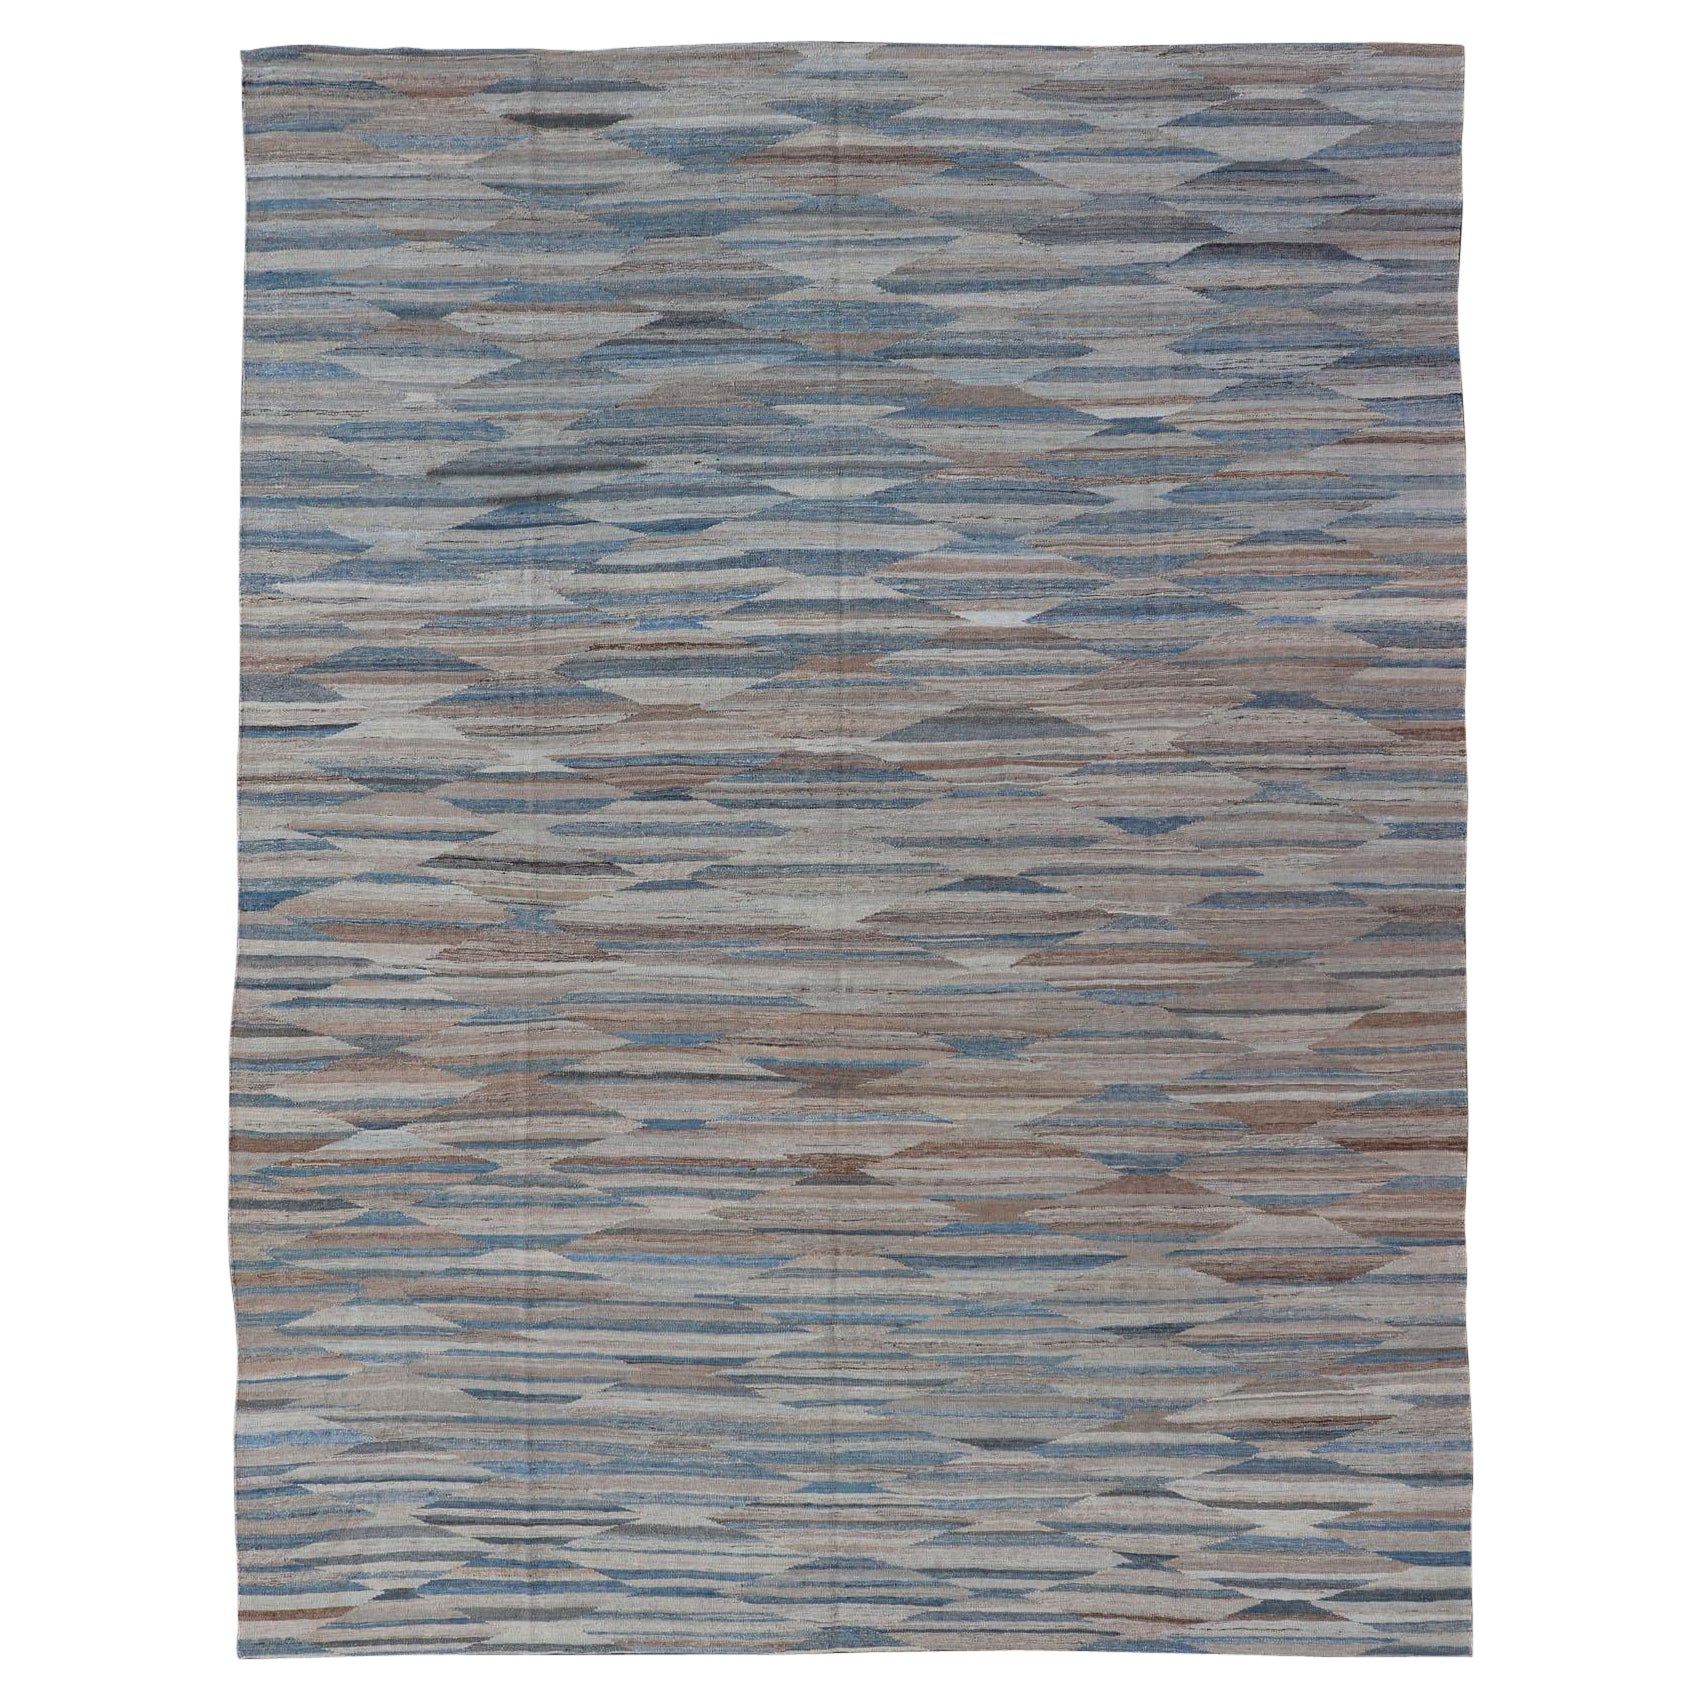 Afghan Modern Kilim All-Over Design in Blues, Browns, and Tan For Sale